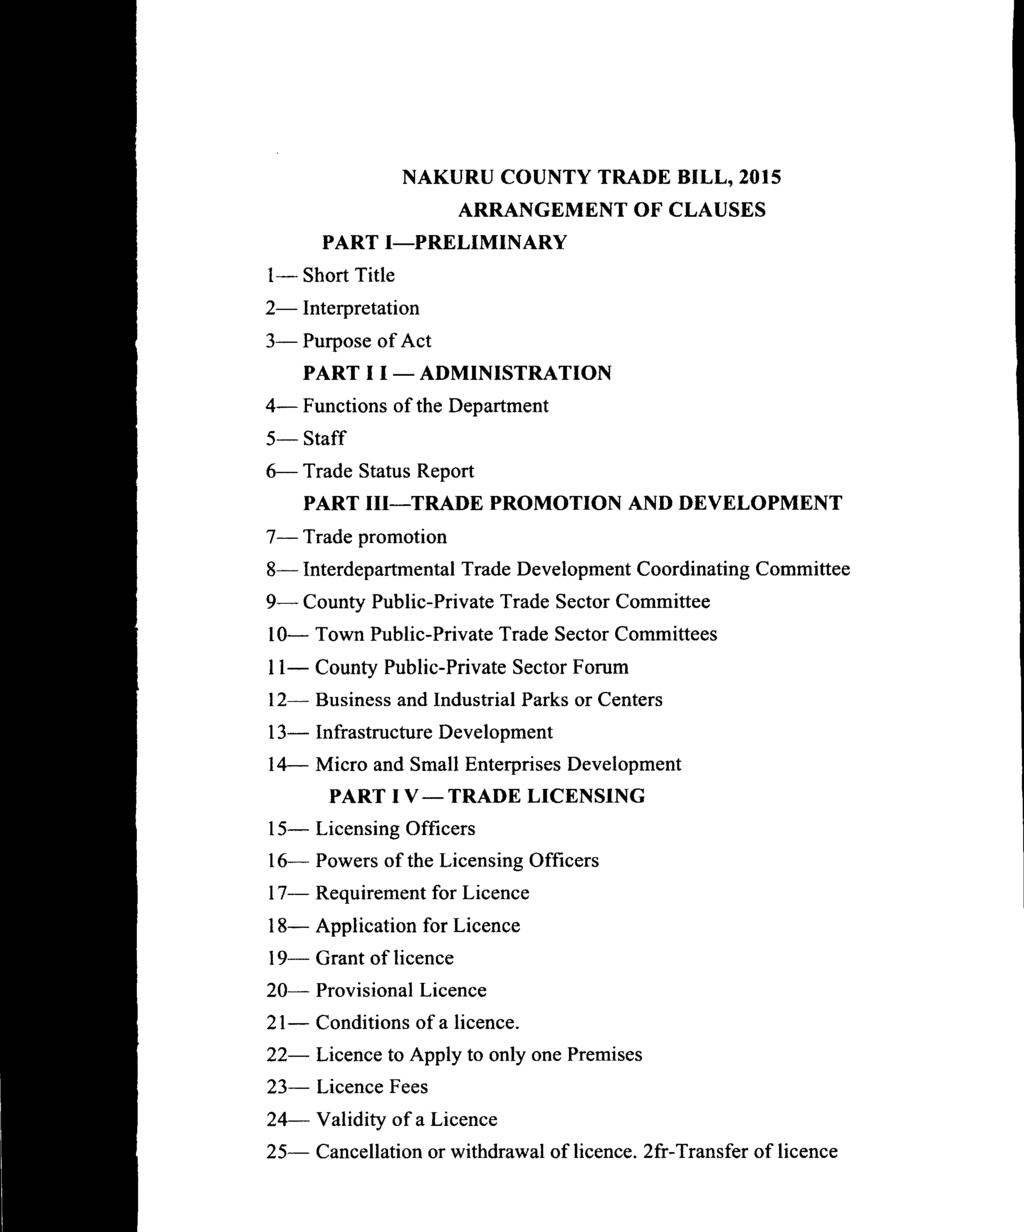 NAKURU COUNTY TRADE BILL, 2015 ARRANGEMENT OF CLAUSES PART I PRELIMINARY Short Title Interpretation Purpose of Act PART I I - ADMINISTRATION Functions of the Department Staff Trade Status Report PART